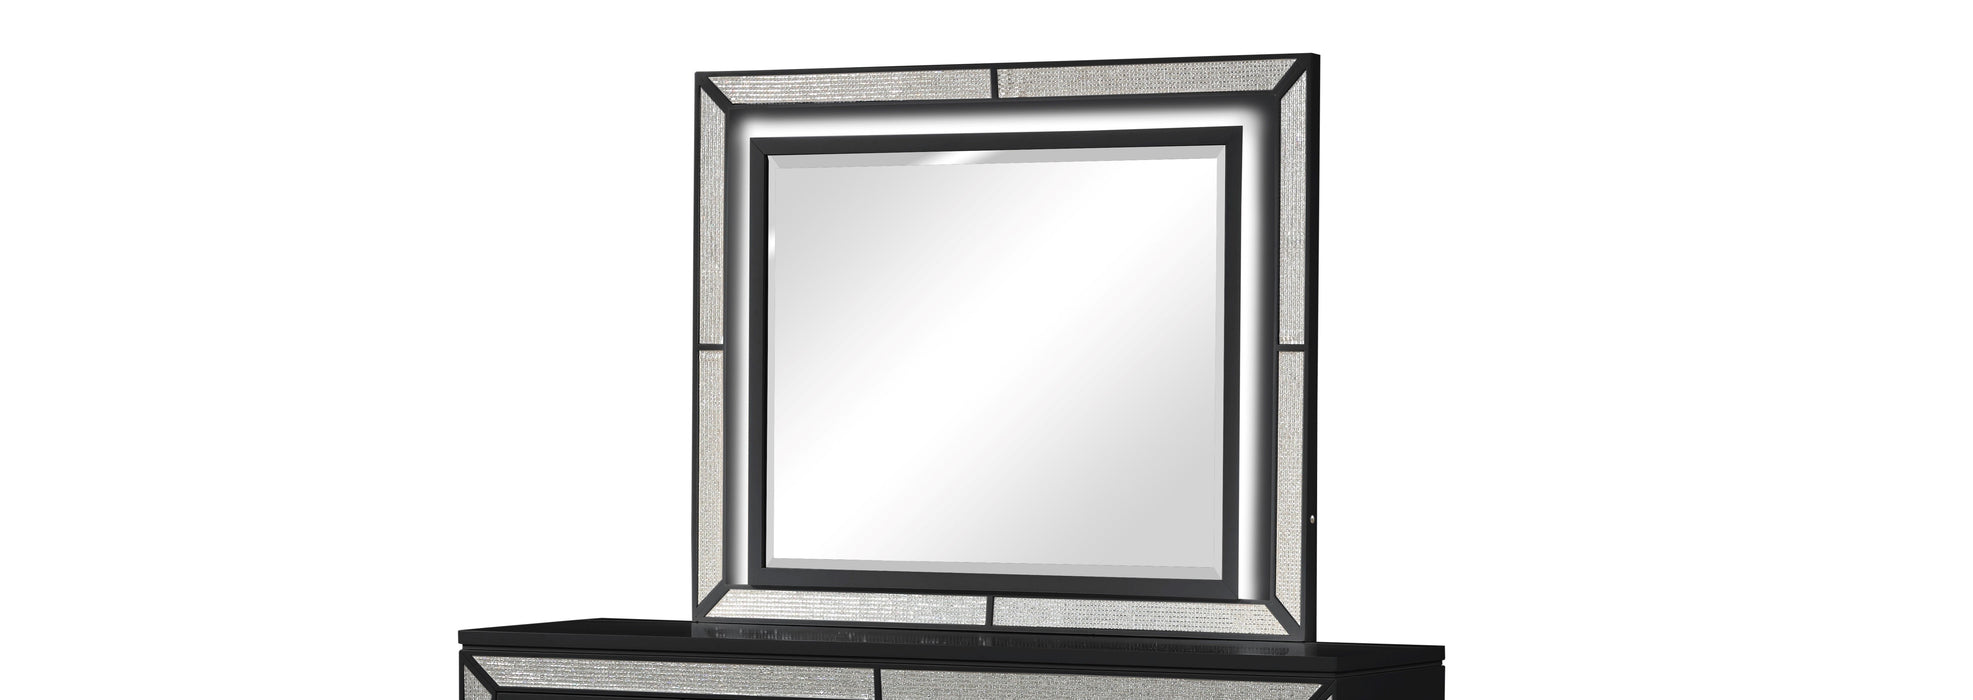 Crystal Modern Mirror Made With Wood Finished In Black